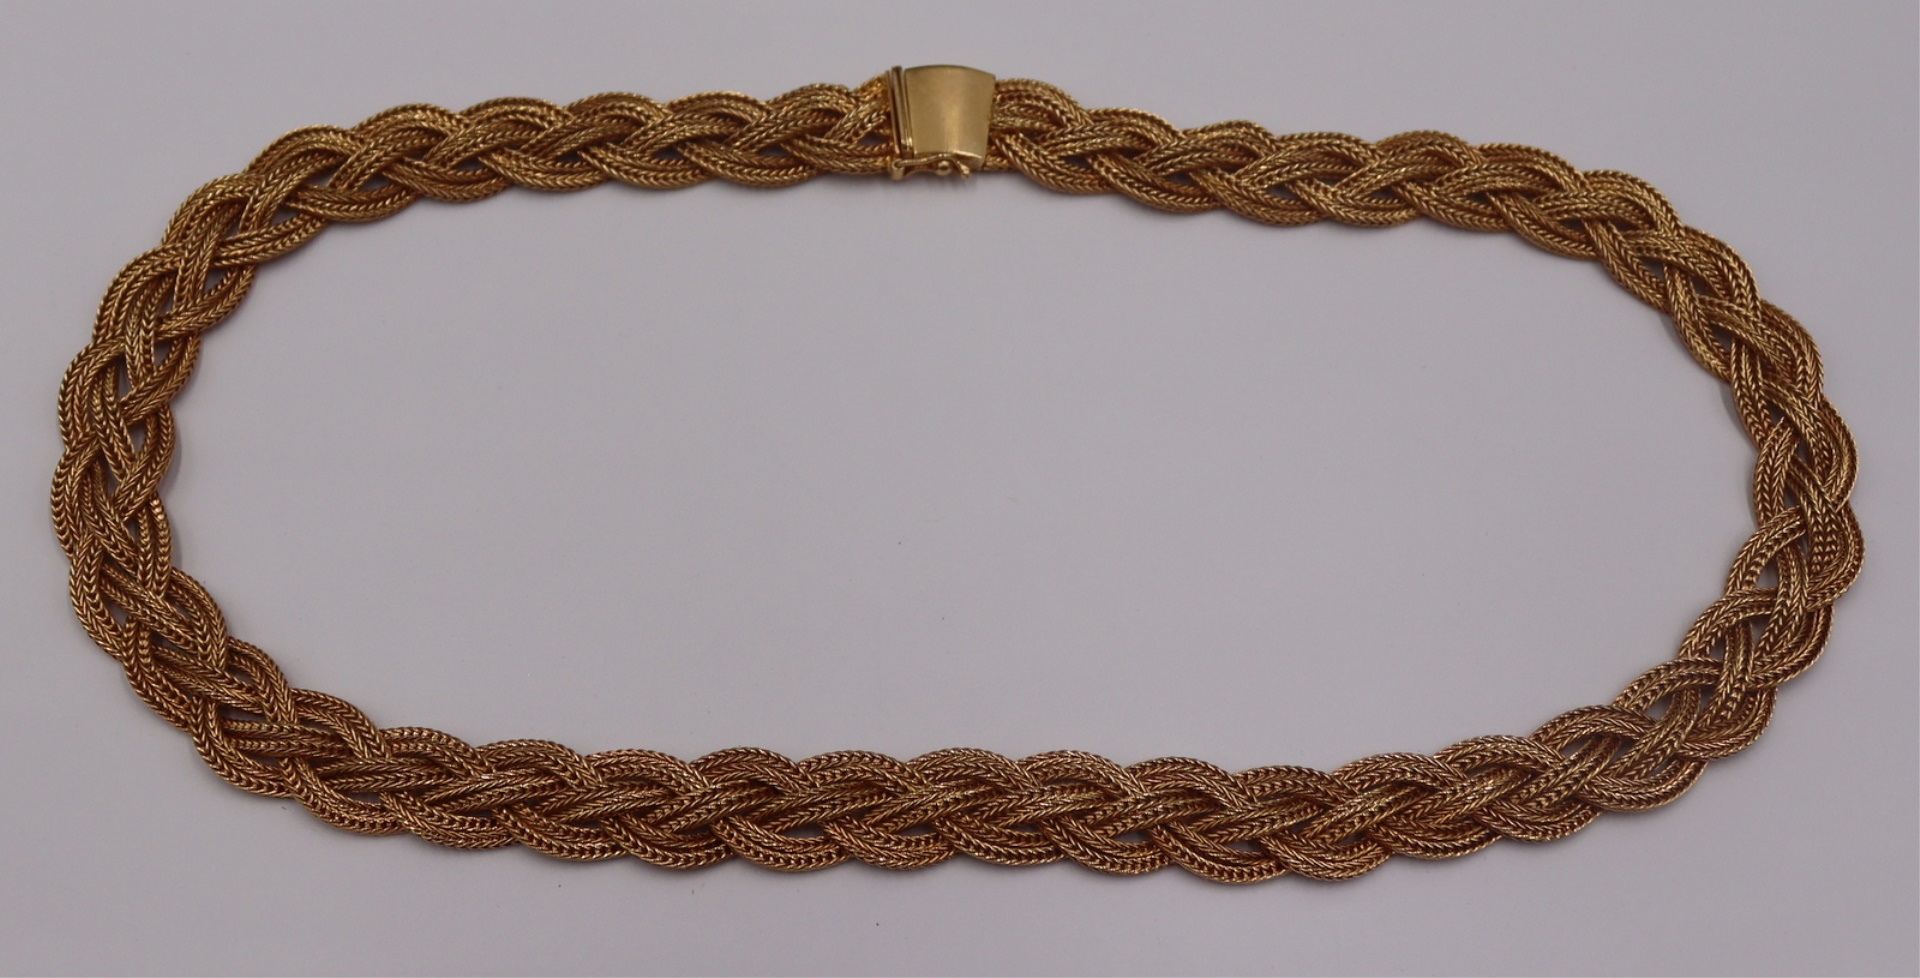 JEWELRY. 18KT GOLD BRAIDED CHAIN